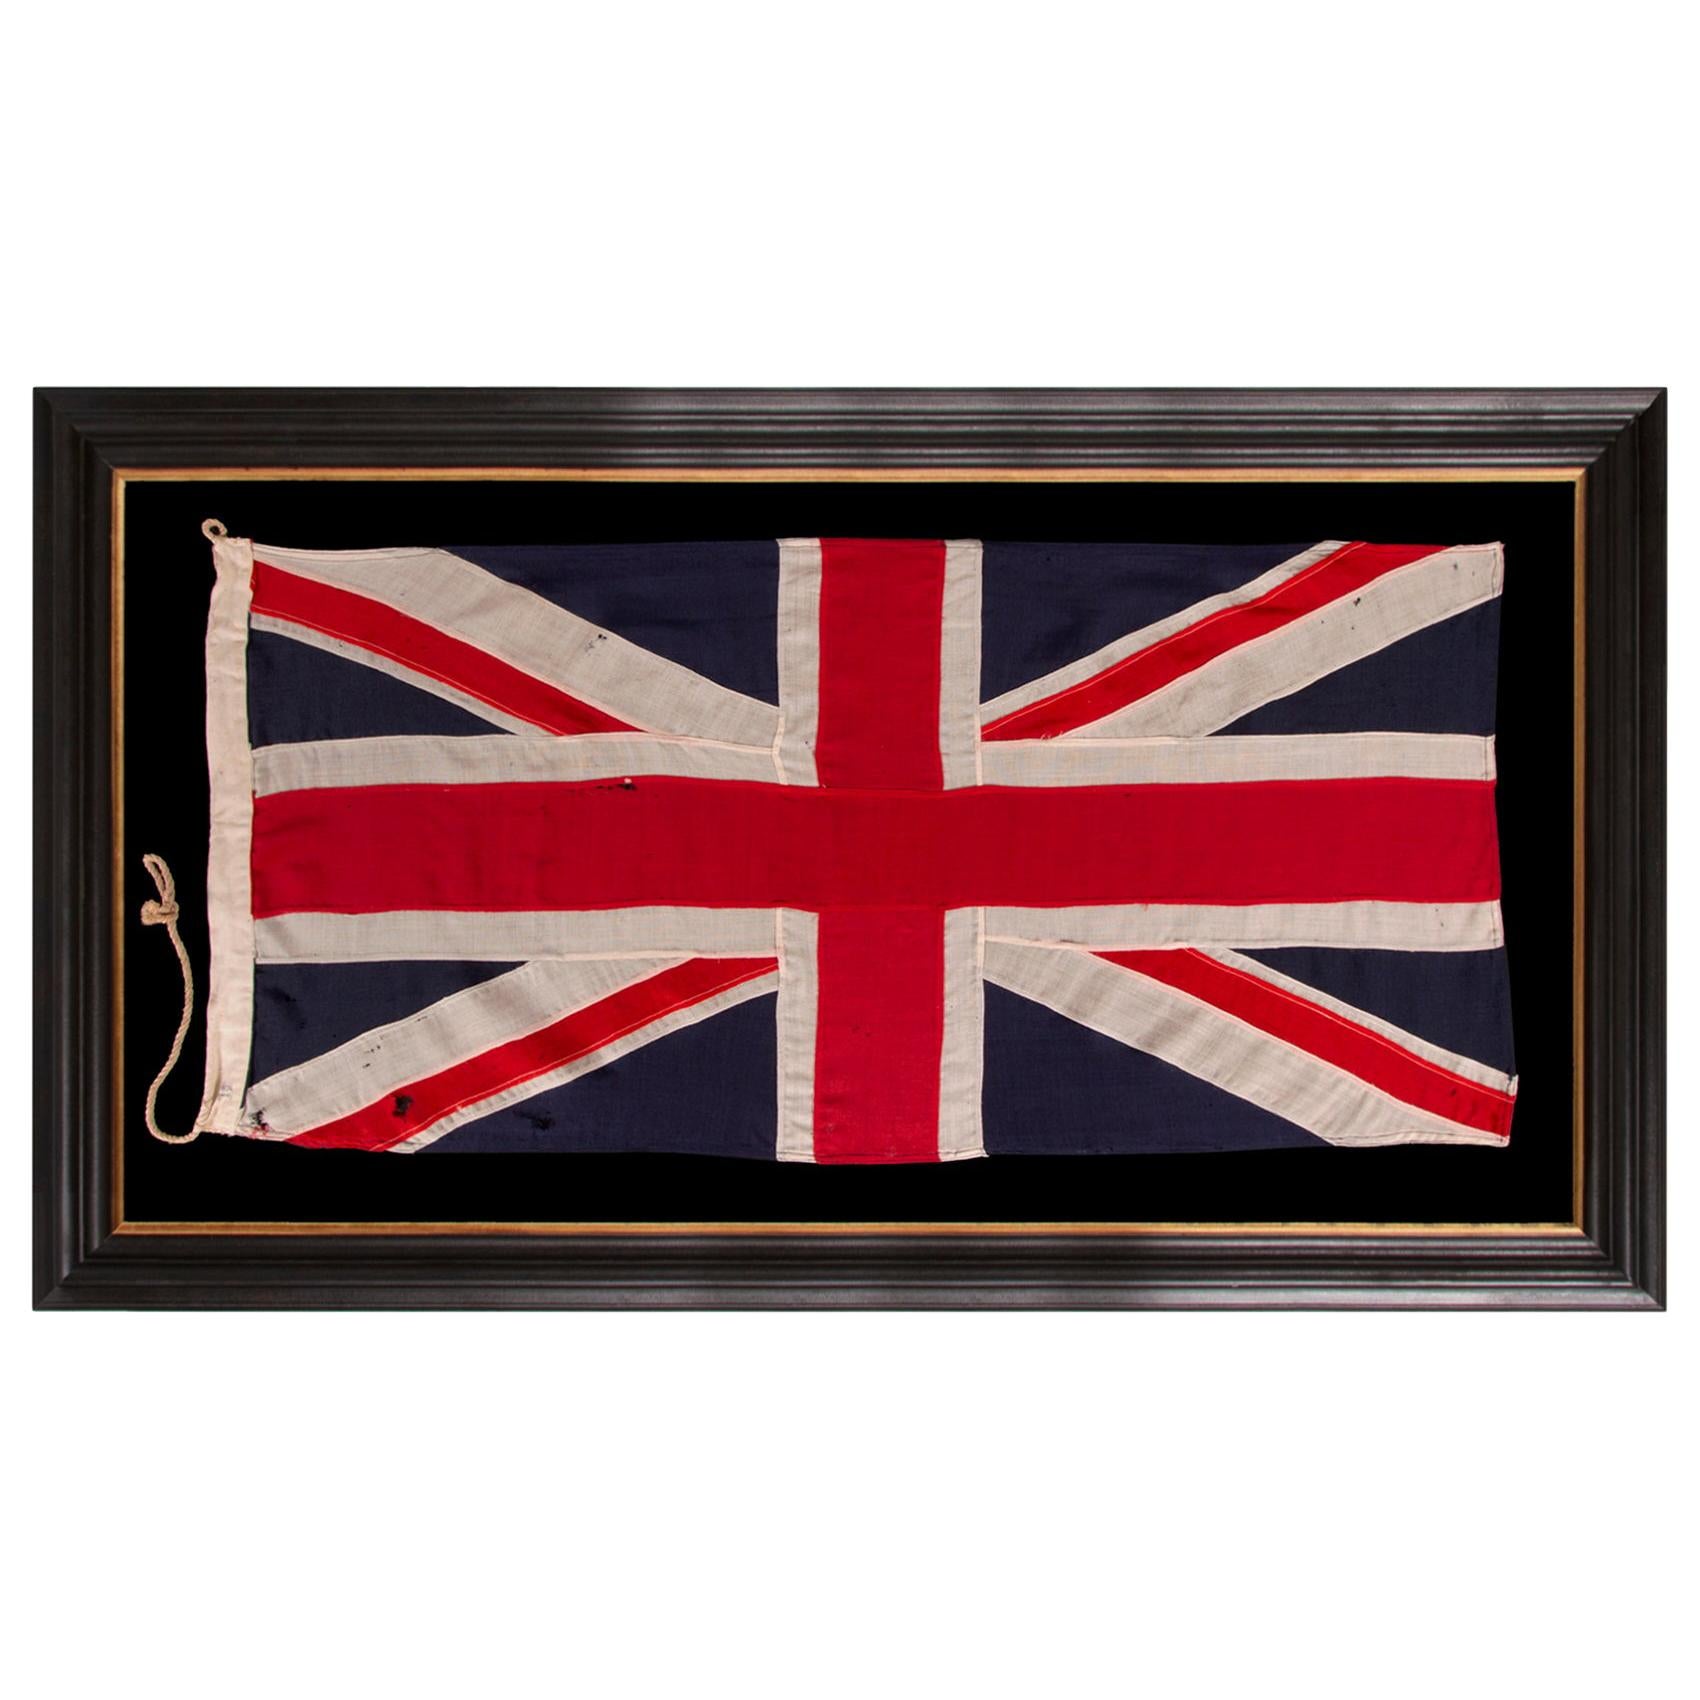 Limited Sales 1918-2020 WW Remembrance Day 5x3ft Flag Union Jack Lest We Forget 